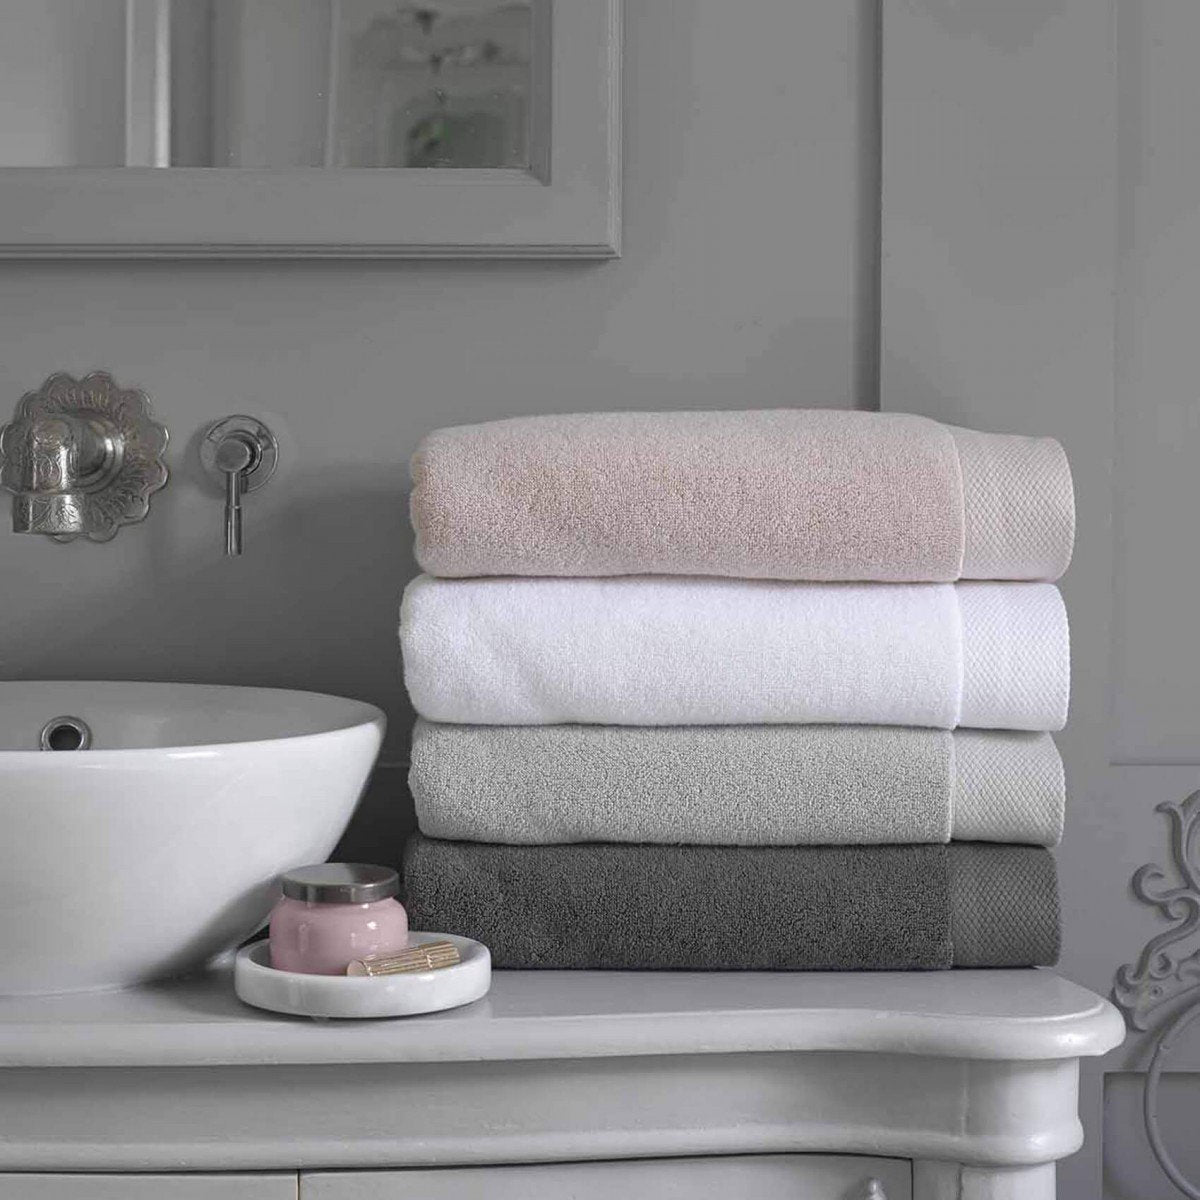 Christy Towels & Bedding: Luxury since 1850